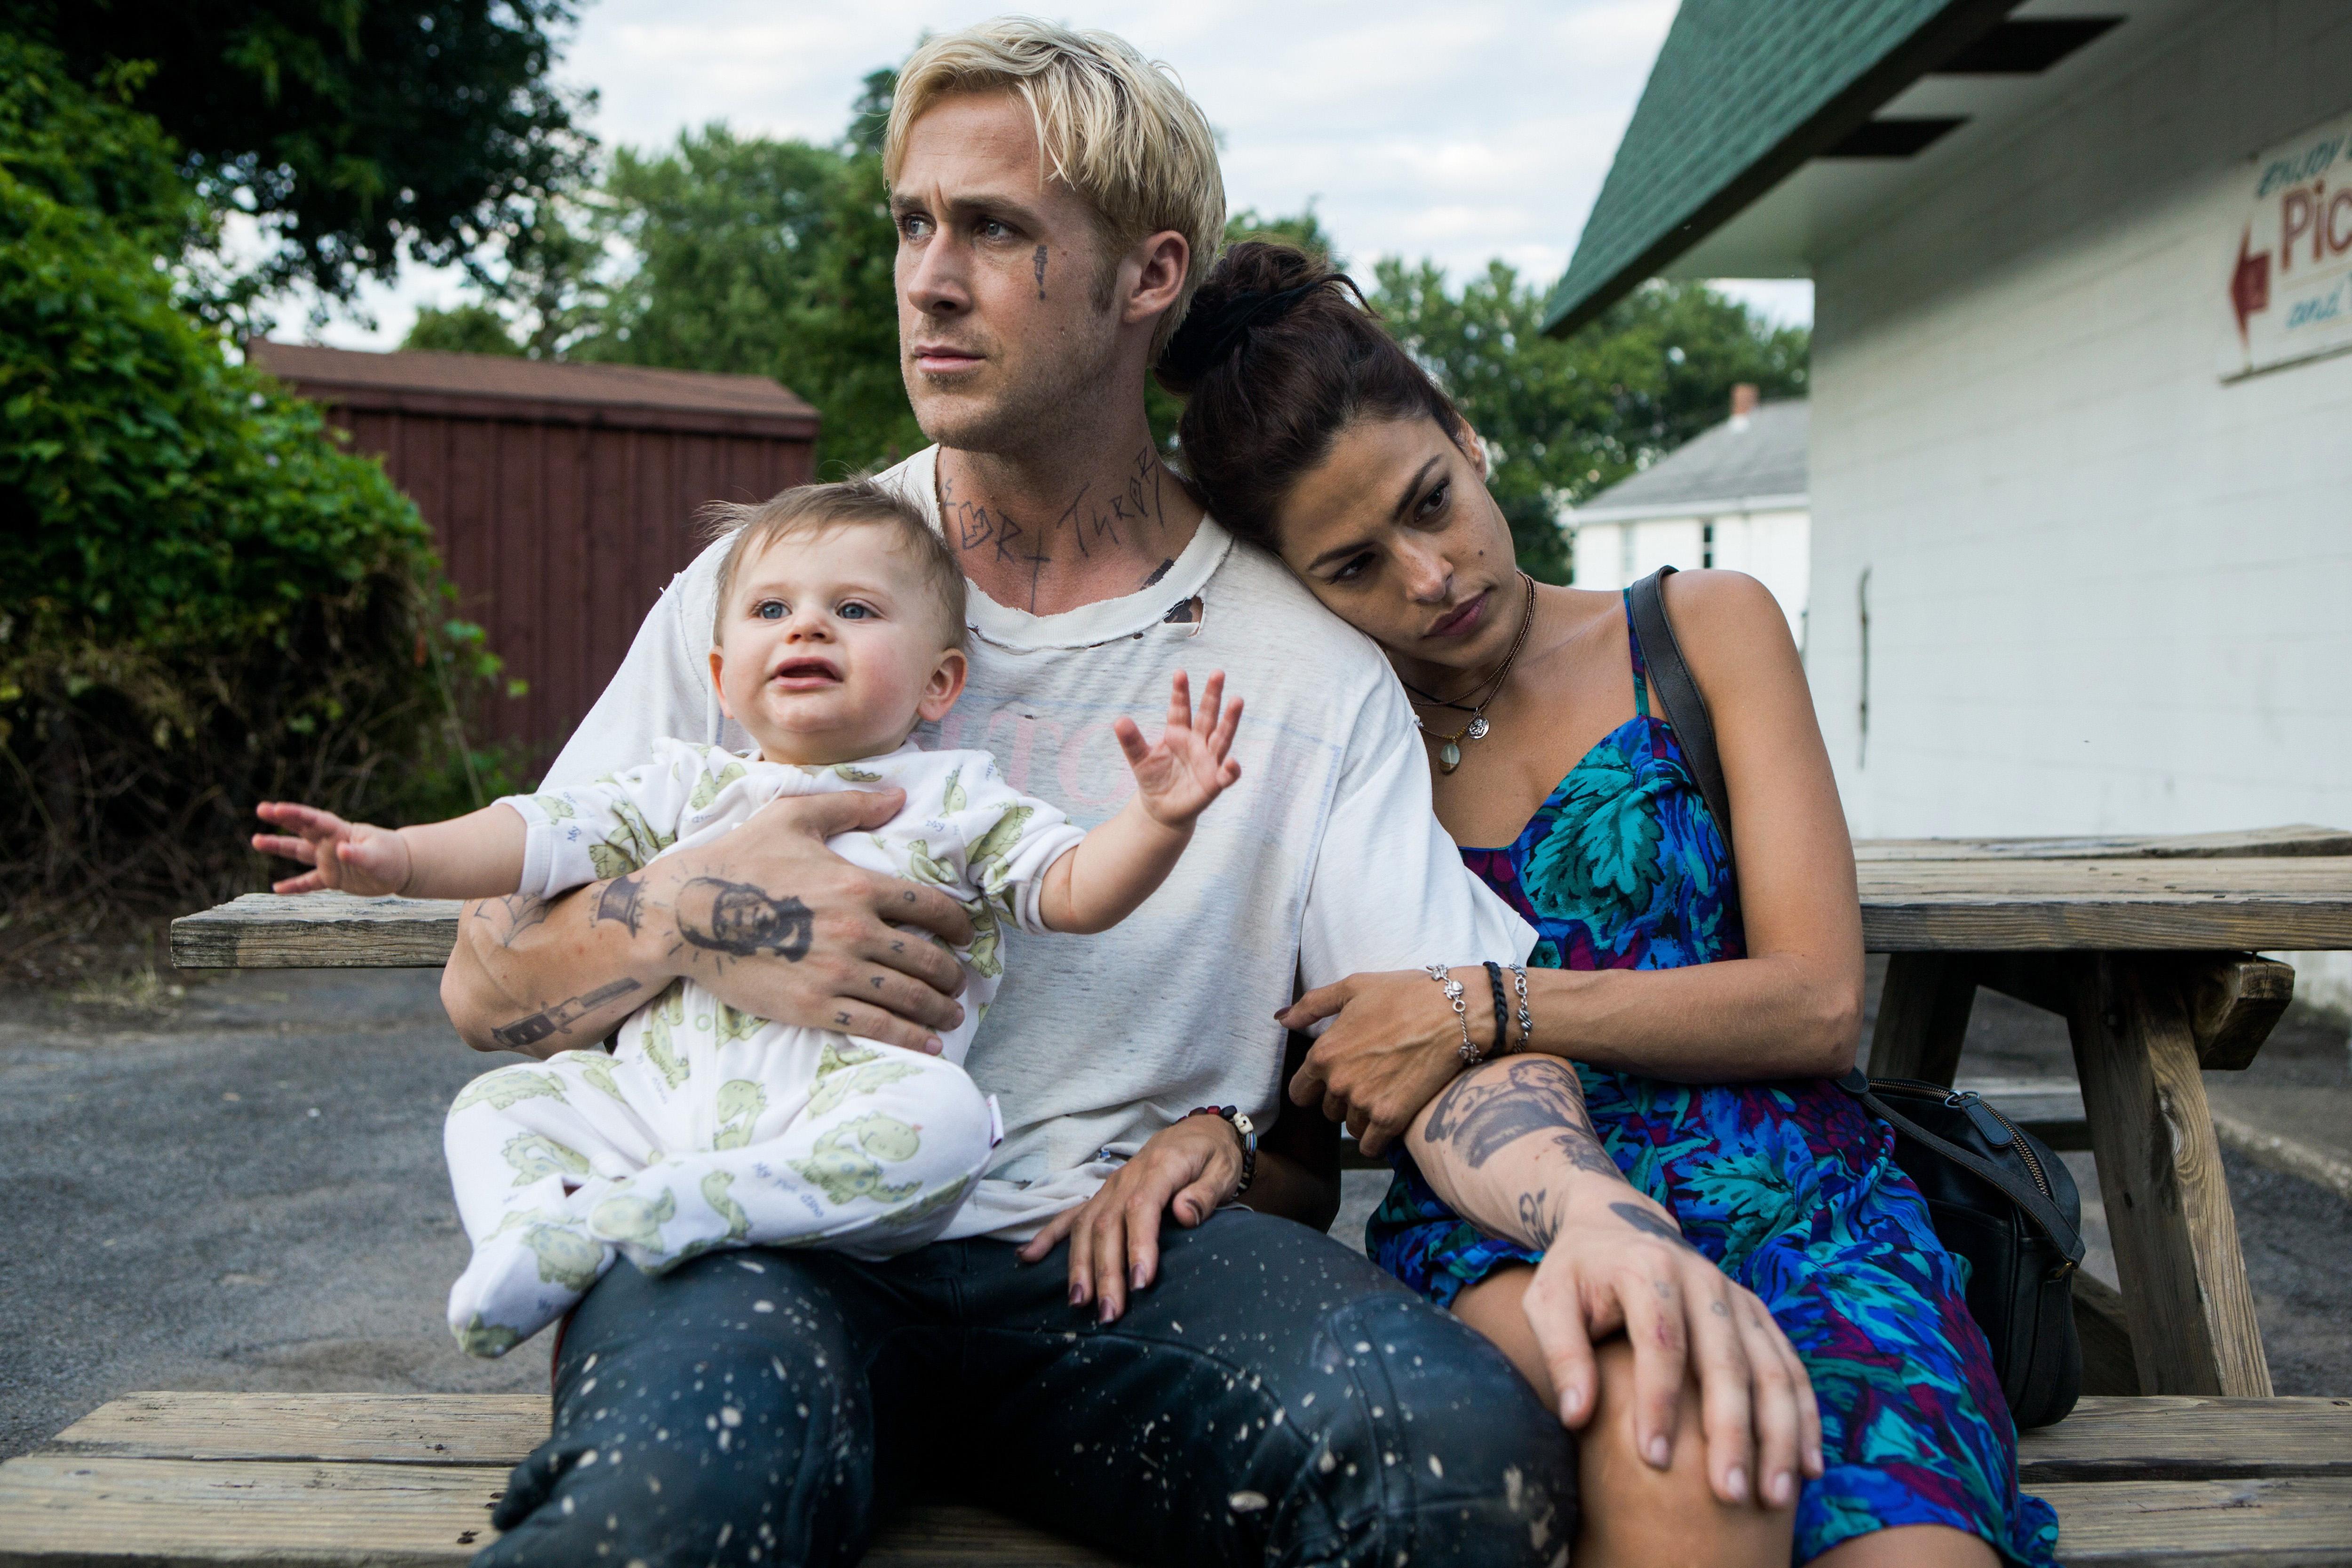 The new met on the set of their 2012 drama film The Place Beyond The Pines